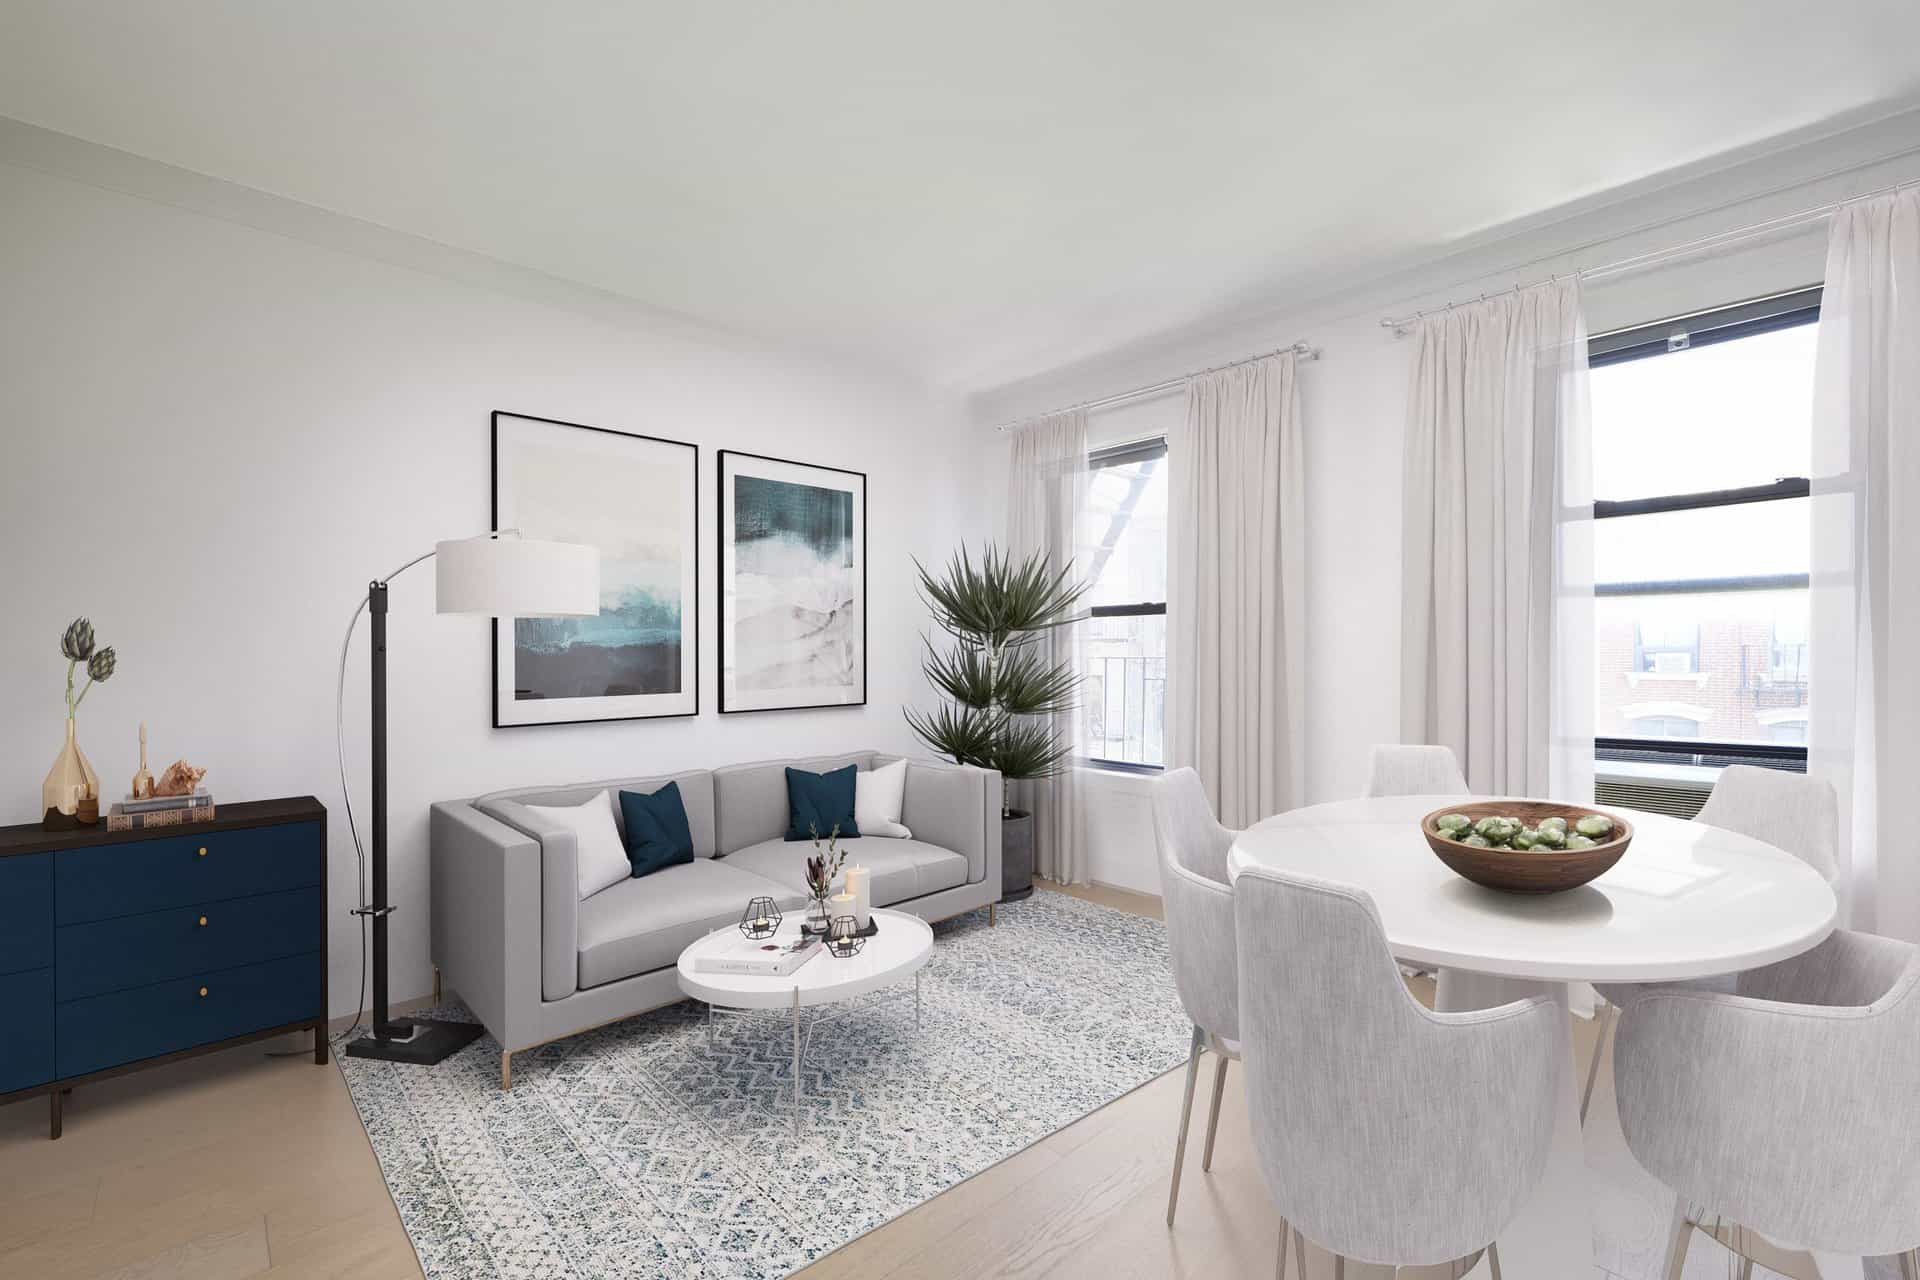 Living room at 245 East 30th Street apartments in Kips Bay with a couch, coffee table, windows and hardwood floors.